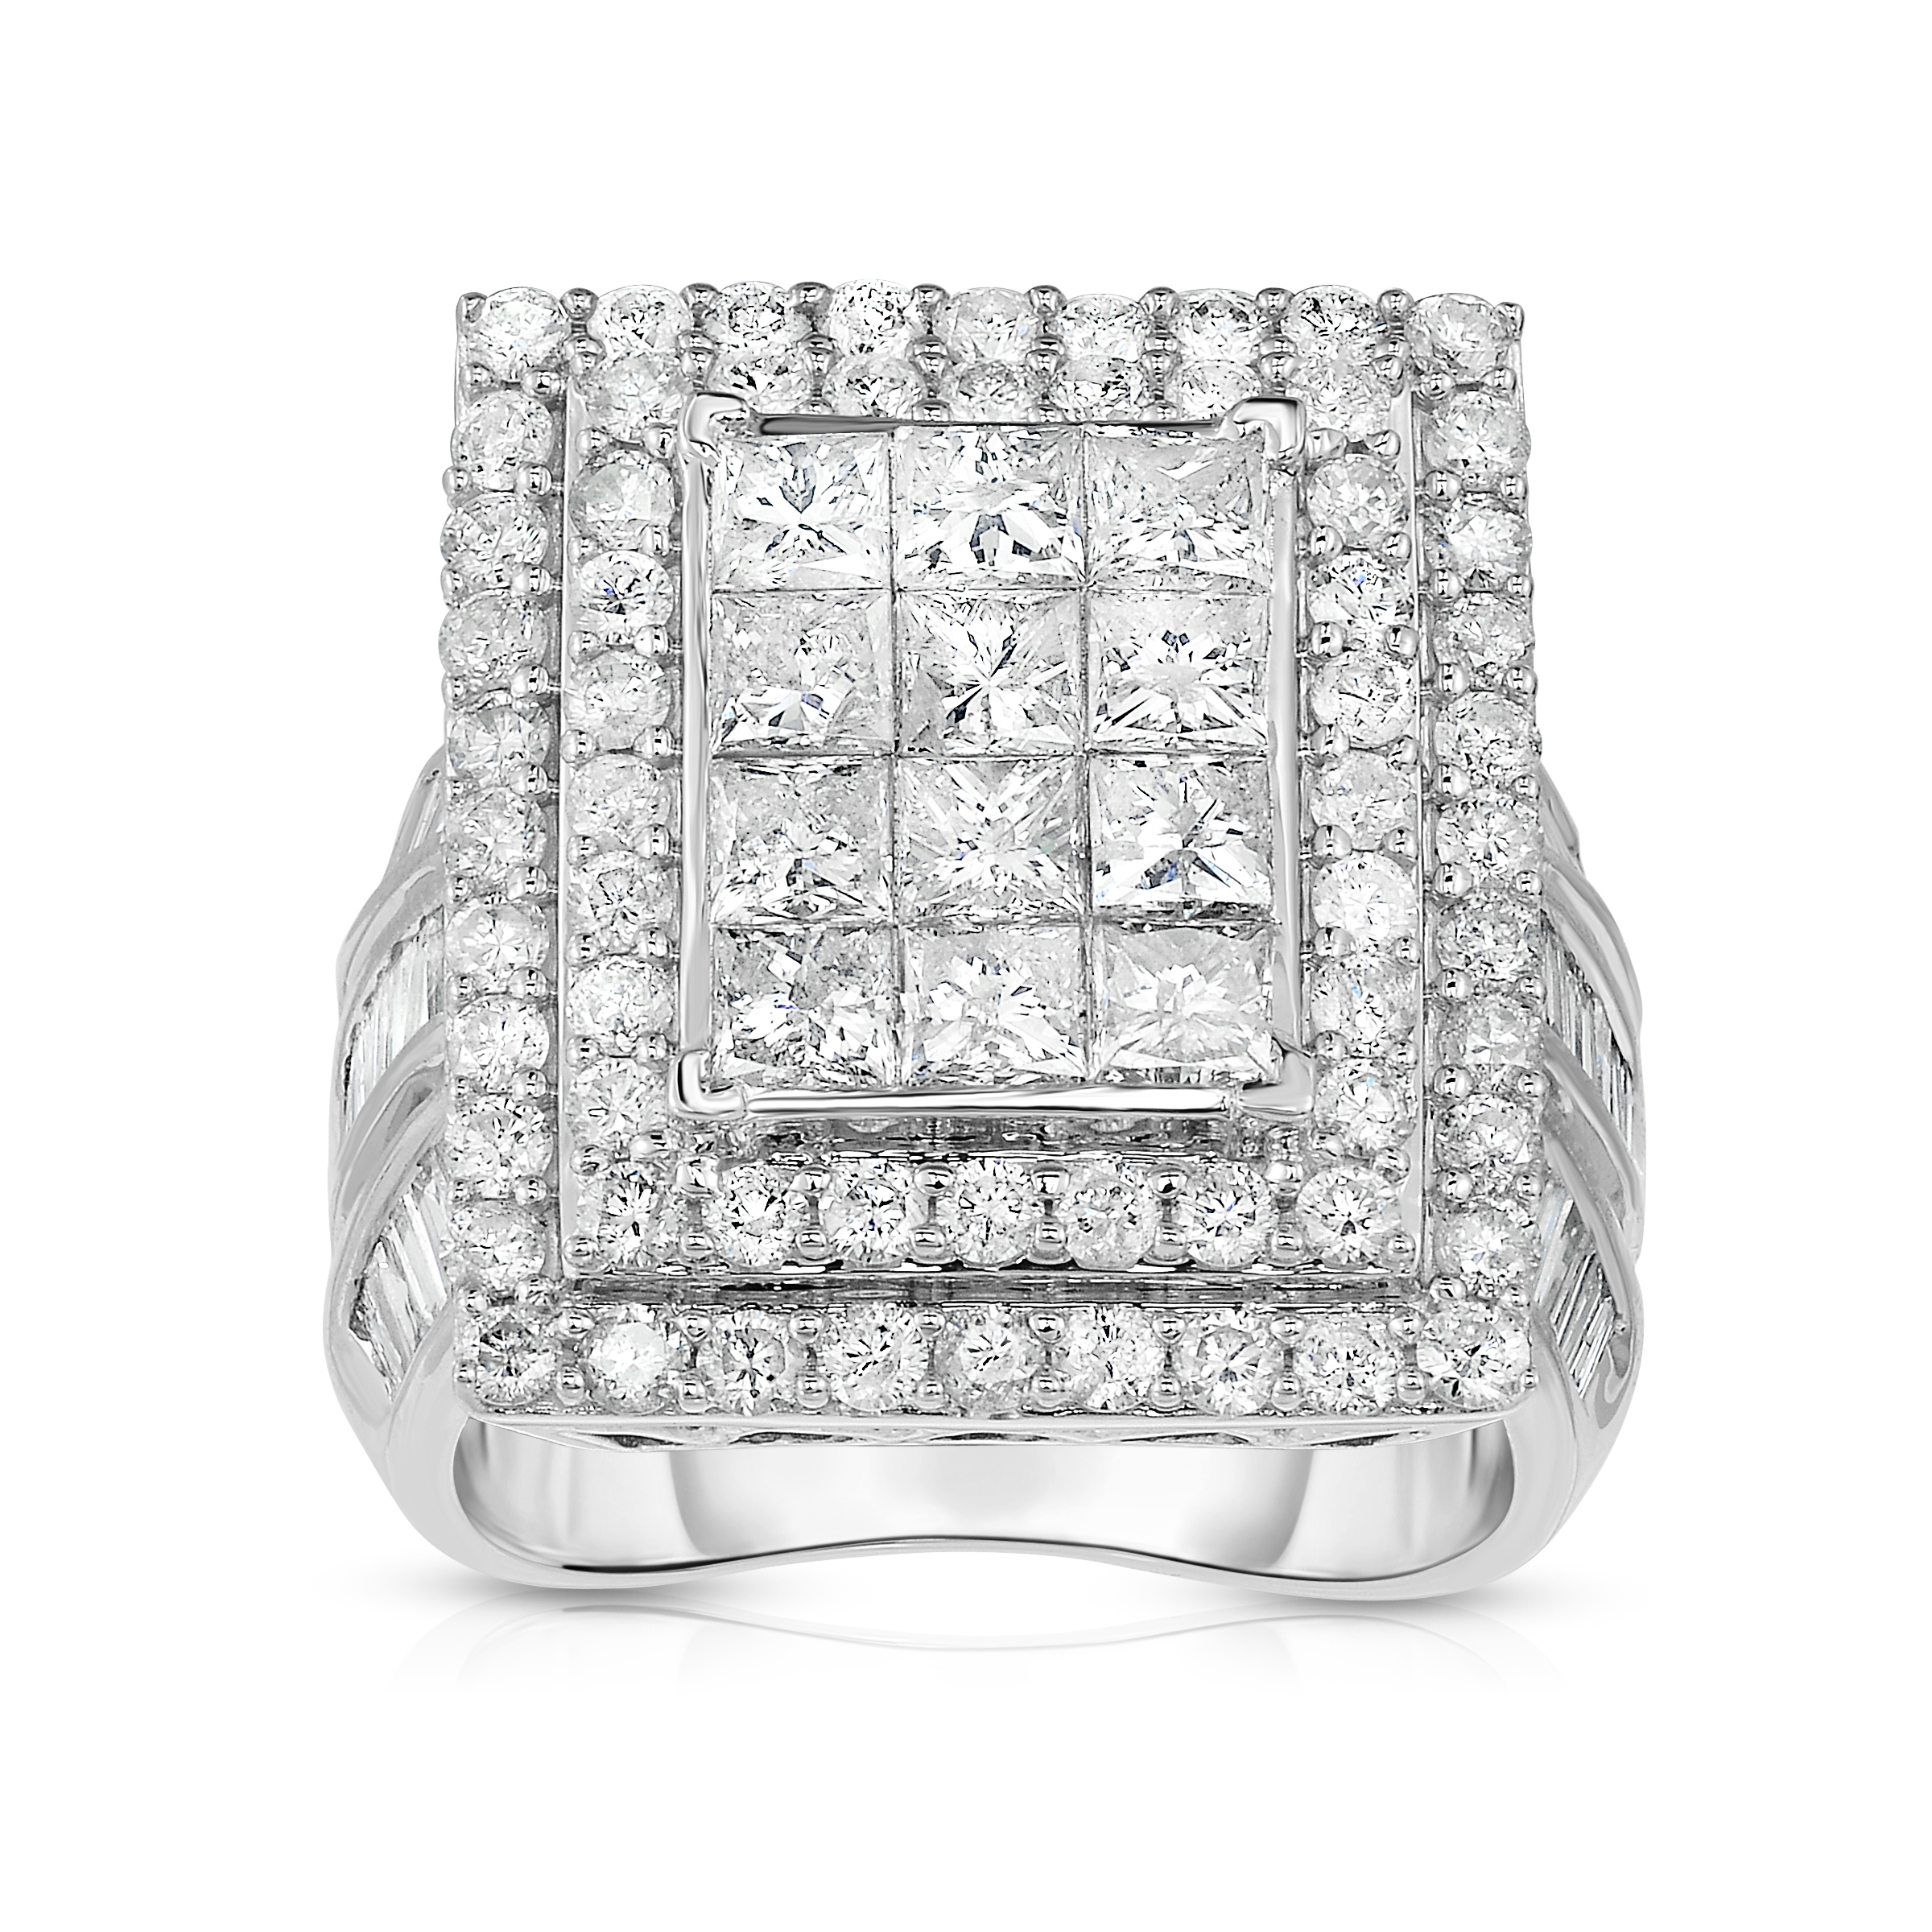 Tradition Diamond 10K White Gold Certified 4.00 CTTW Double Halo Square Ring